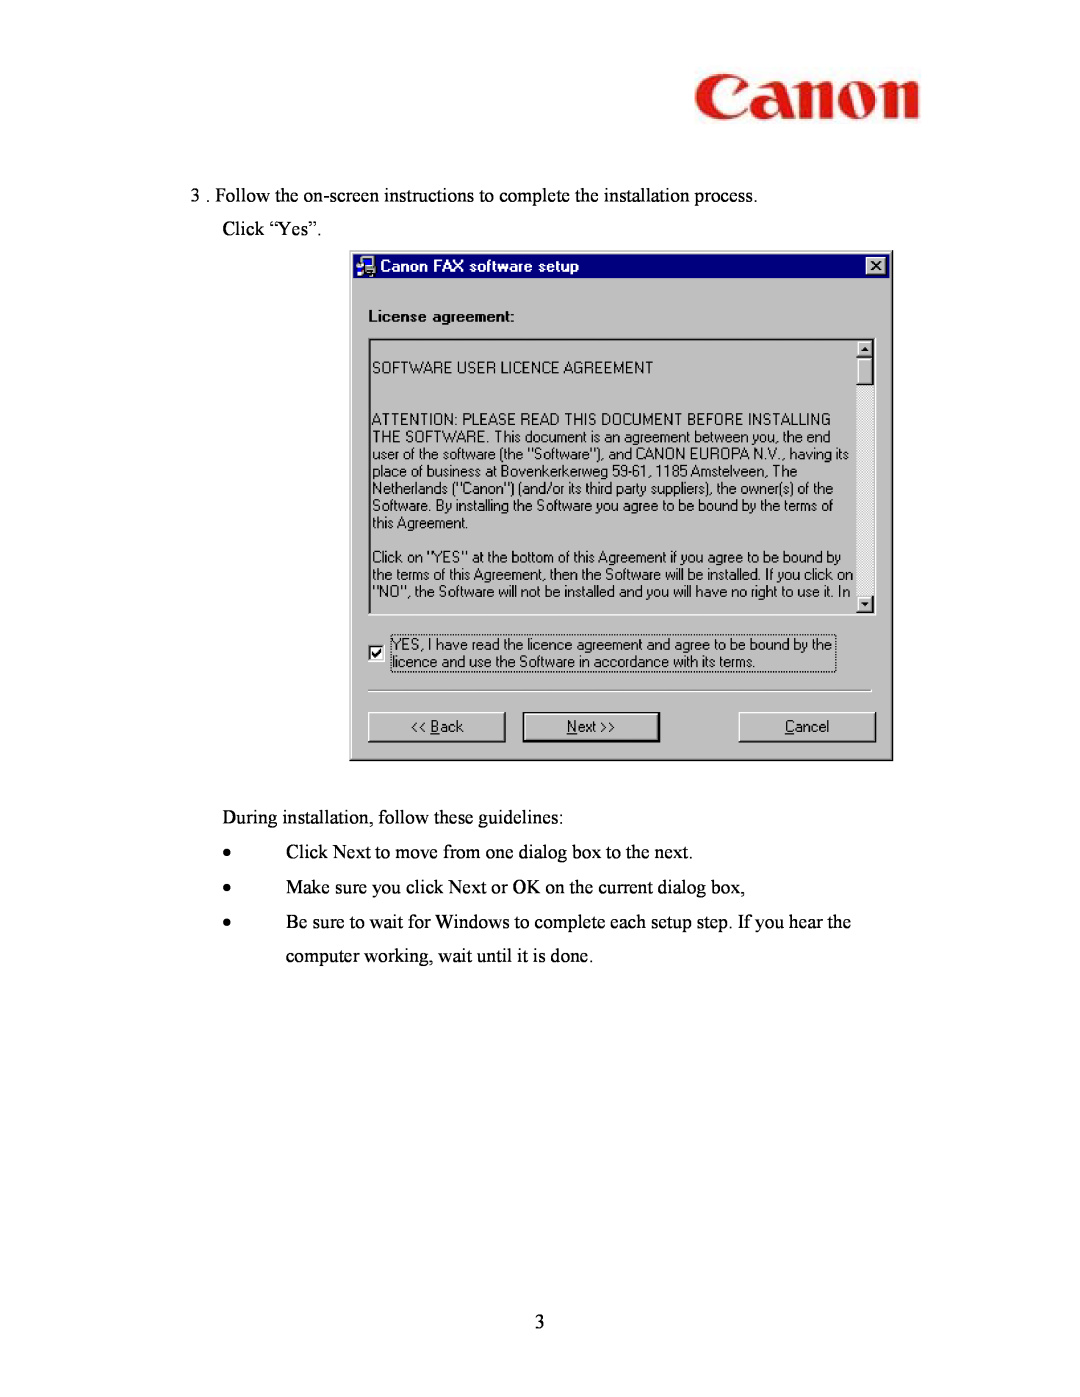 Canon FAX-L350 manual During installation, follow these guidelines, Click Next to move from one dialog box to the next 